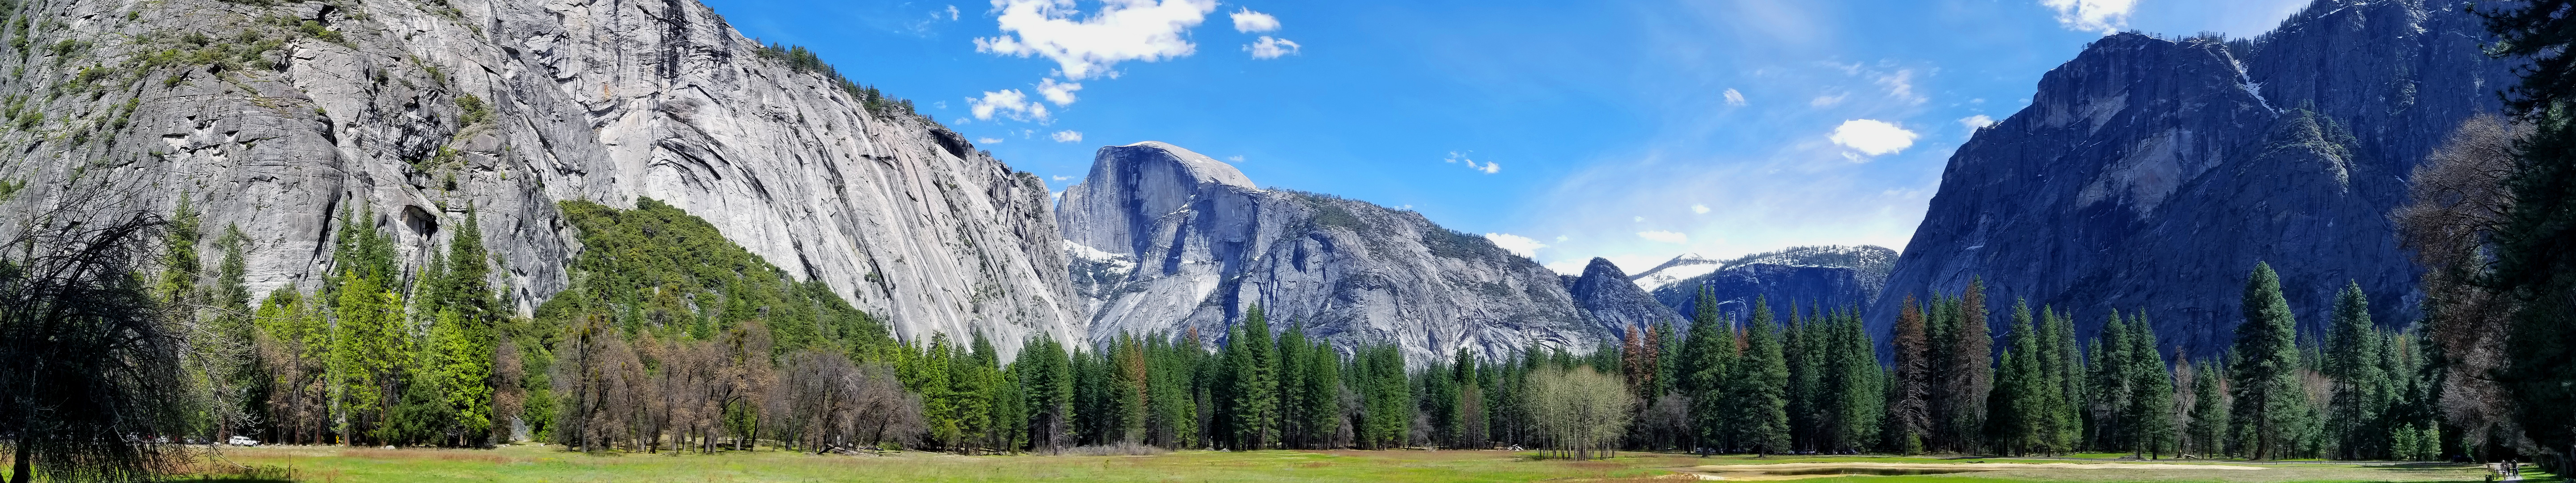 General 5760x1080 panorama triple screen multiple display nature photography Yosemite Valley Yosemite National Park Half Dome cliff mountains trees forest field USA